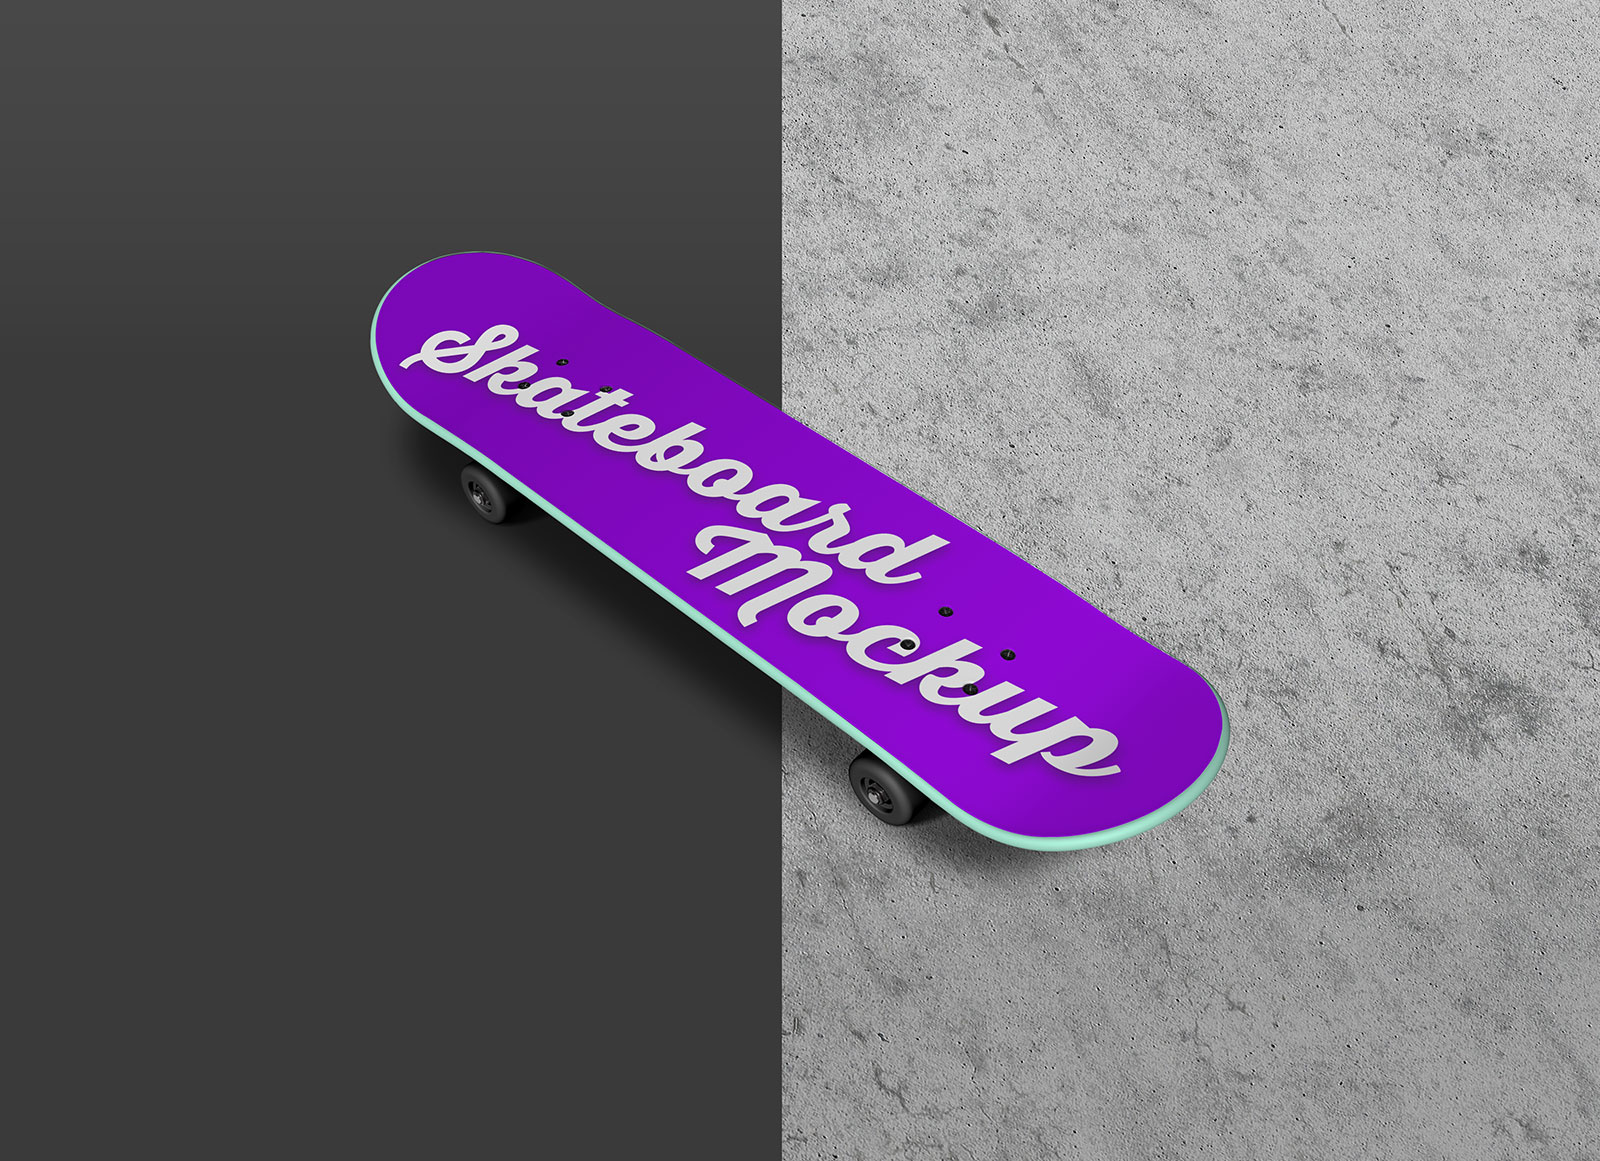 Free-Perspective-View-Skateboard-Mockup-PSD